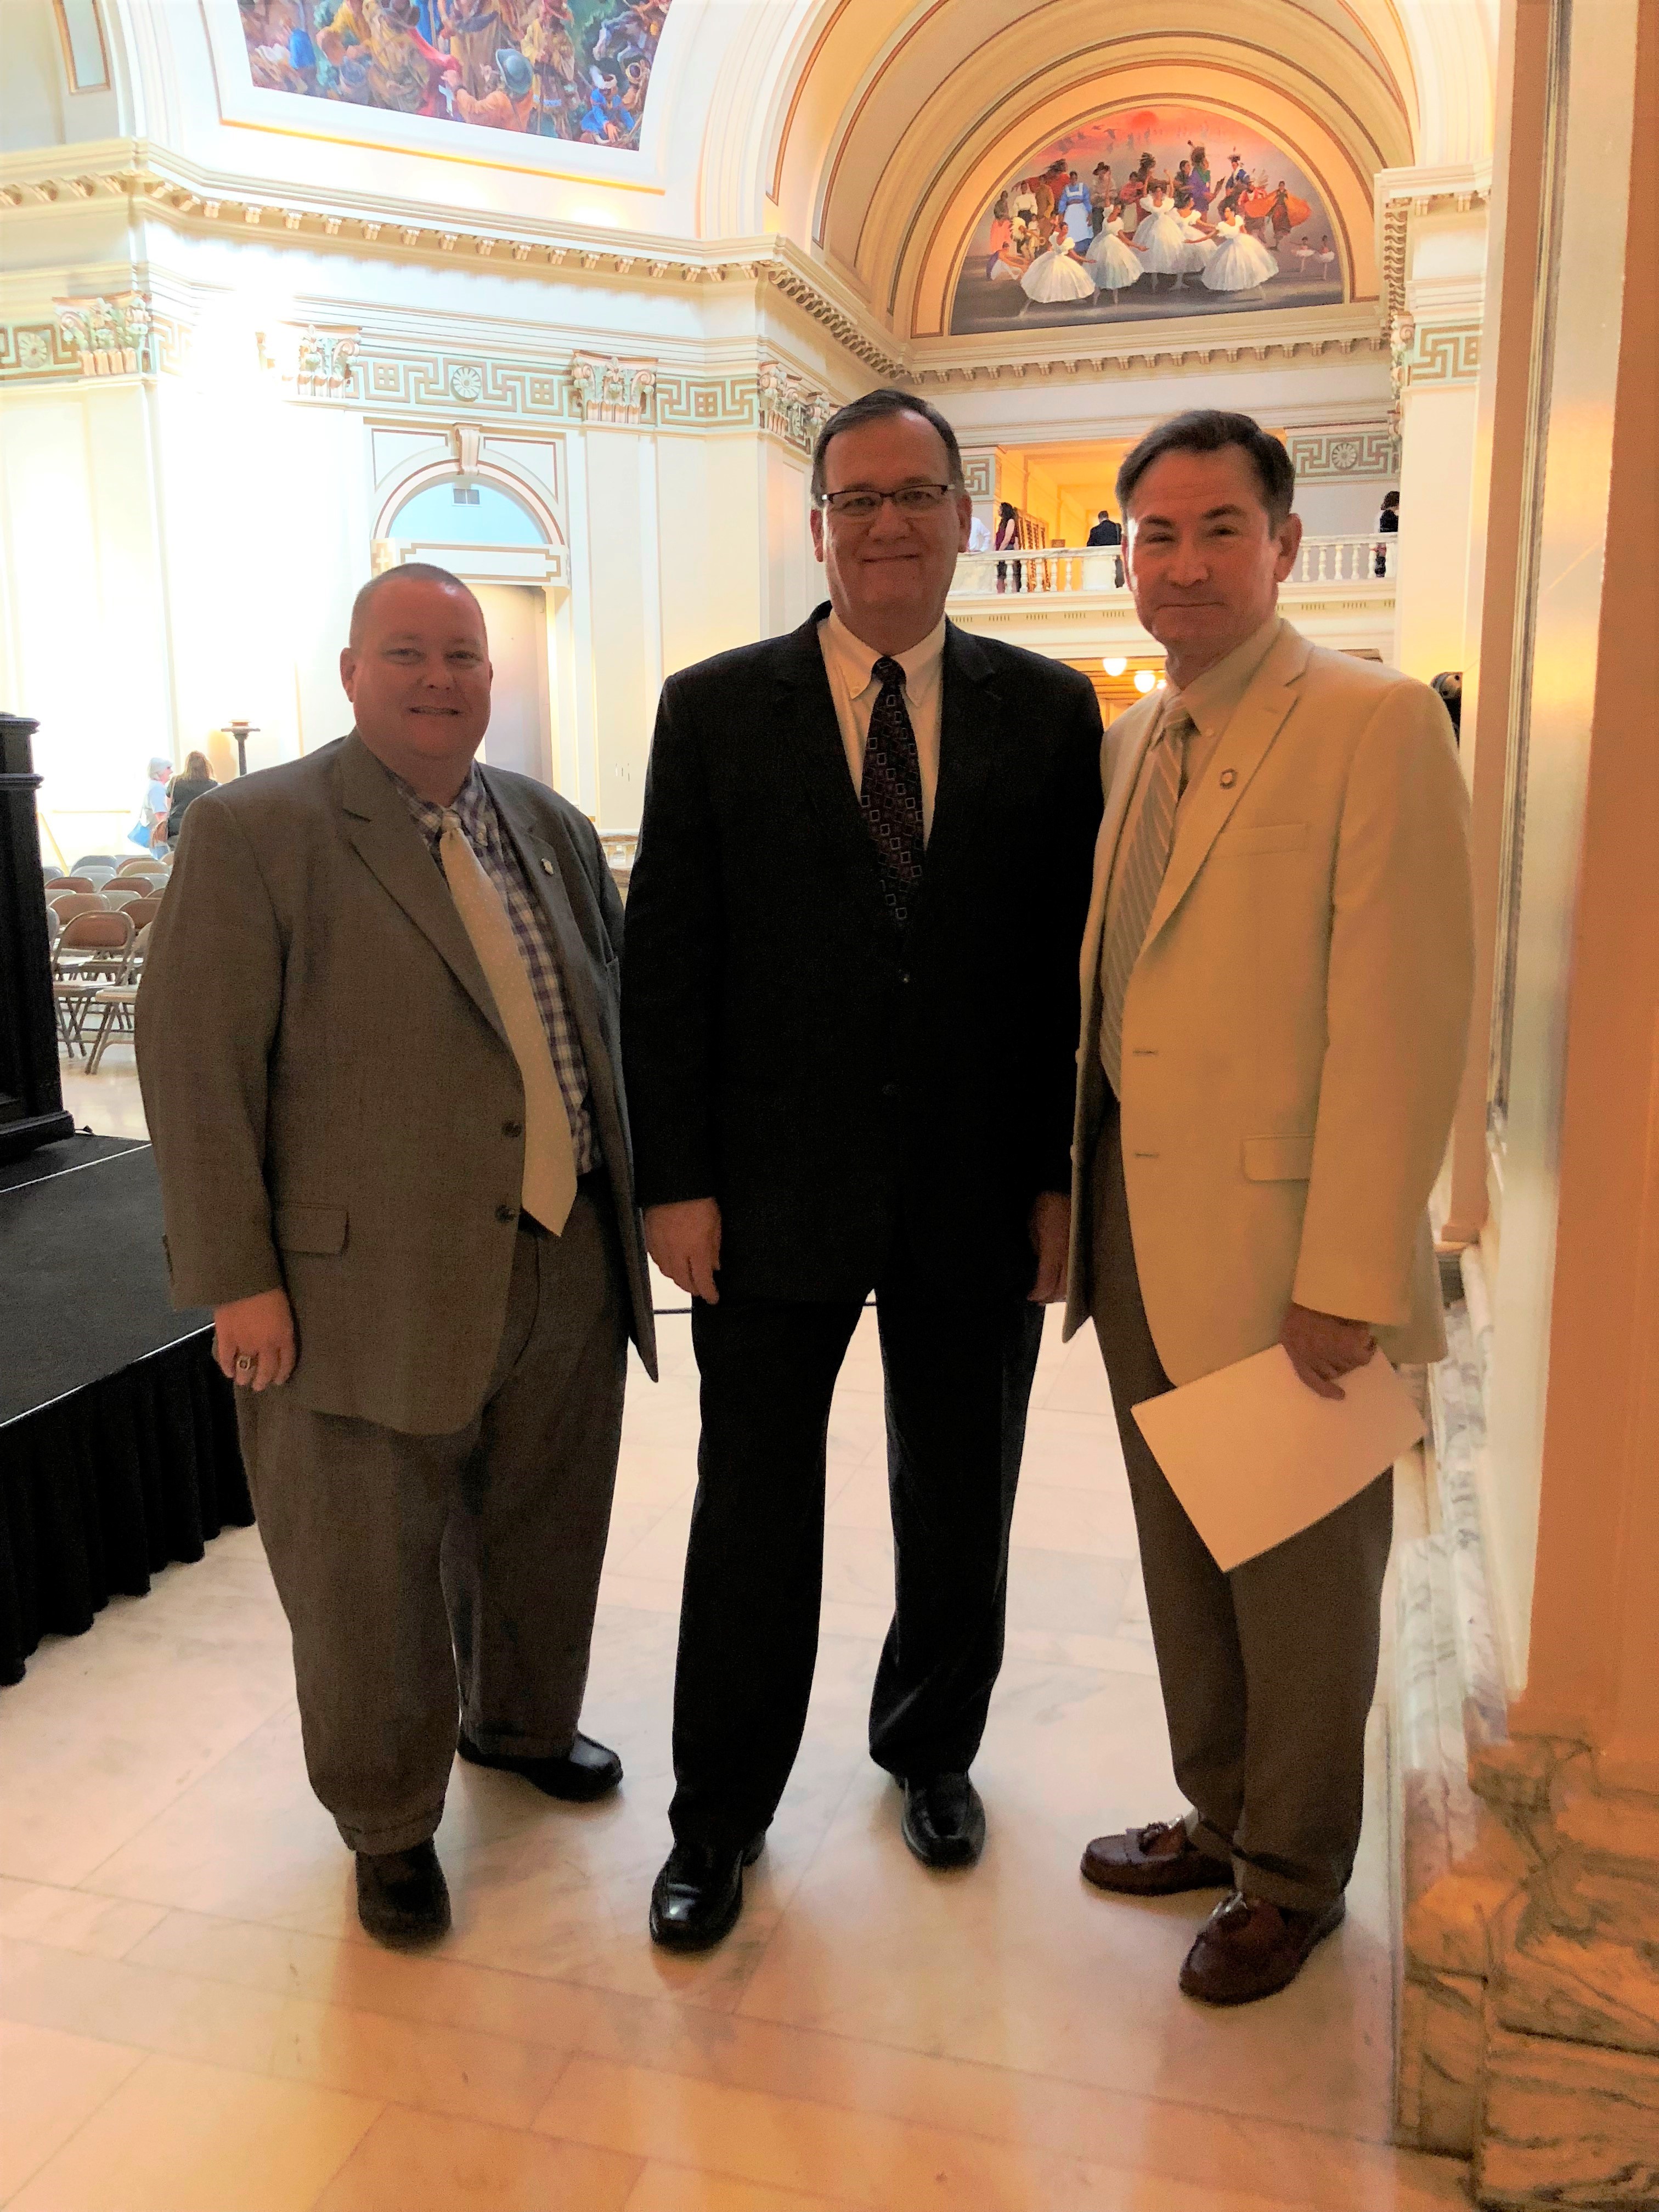 The Senate Health and Human Services Committee confirmed the appointment of Charles E. “Chuck” Skillings of Shawnee to the State Board  of Health Monday.  He is pictured with Sen. Ron Sharp, who carried his  nomination, and Rep. Dell Kerbs both of Shawnee.